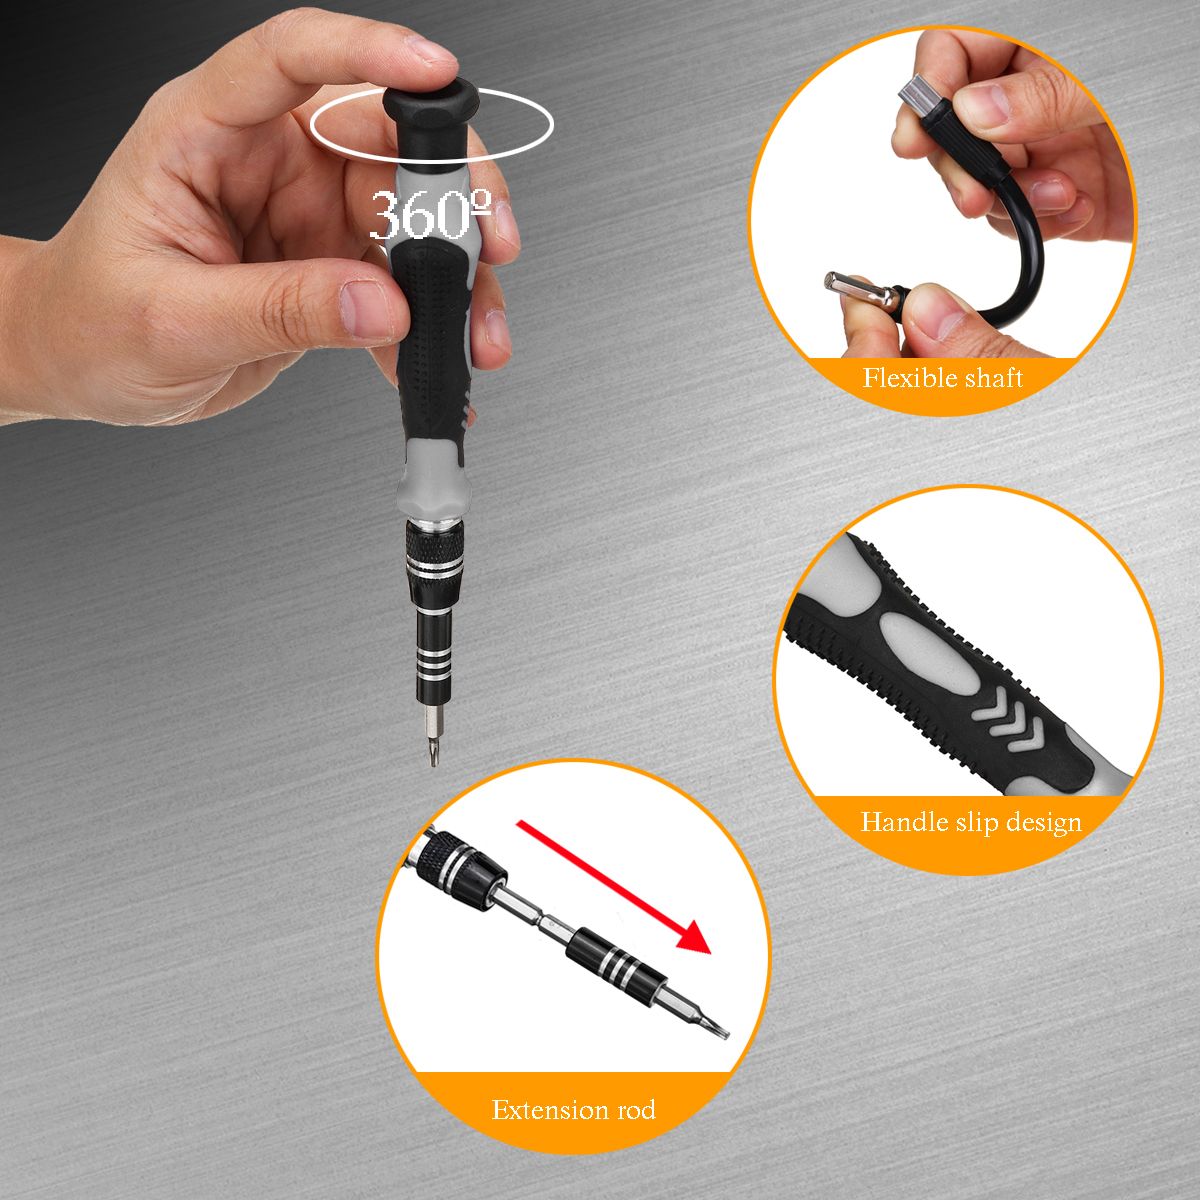 Precision-Screwdriver-Kit-116-in-1-with-Bits-Screwdrivers-Magnetic-Driver-Kit-with-Flexible-Shaft-Ex-1608392